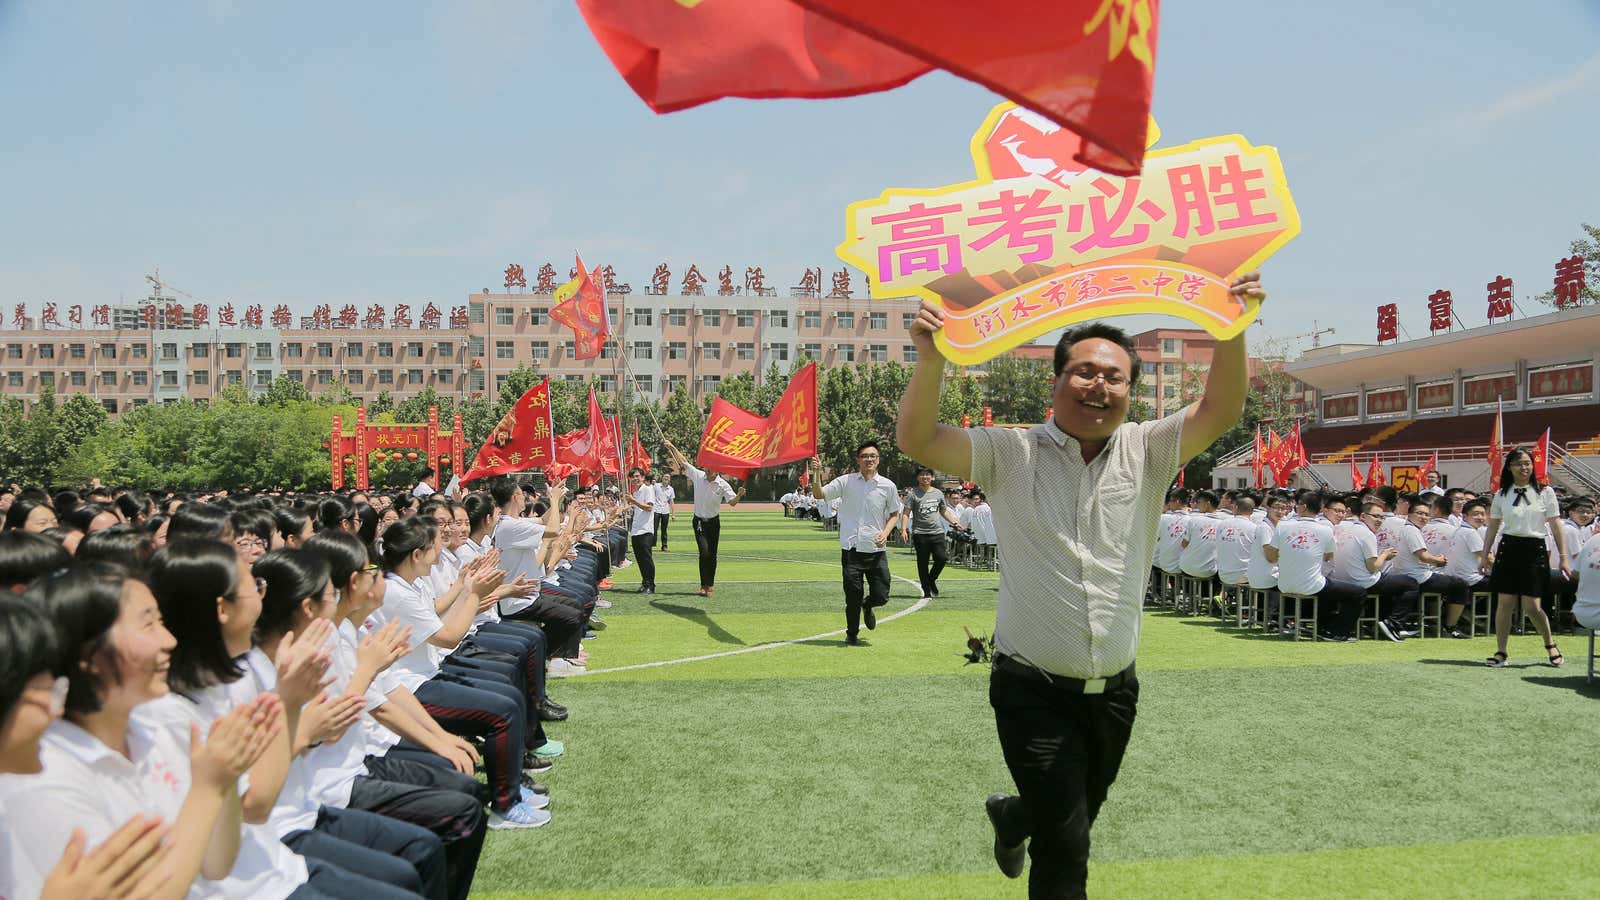 A teachur running with a sign that reads “Gaokao victory.”